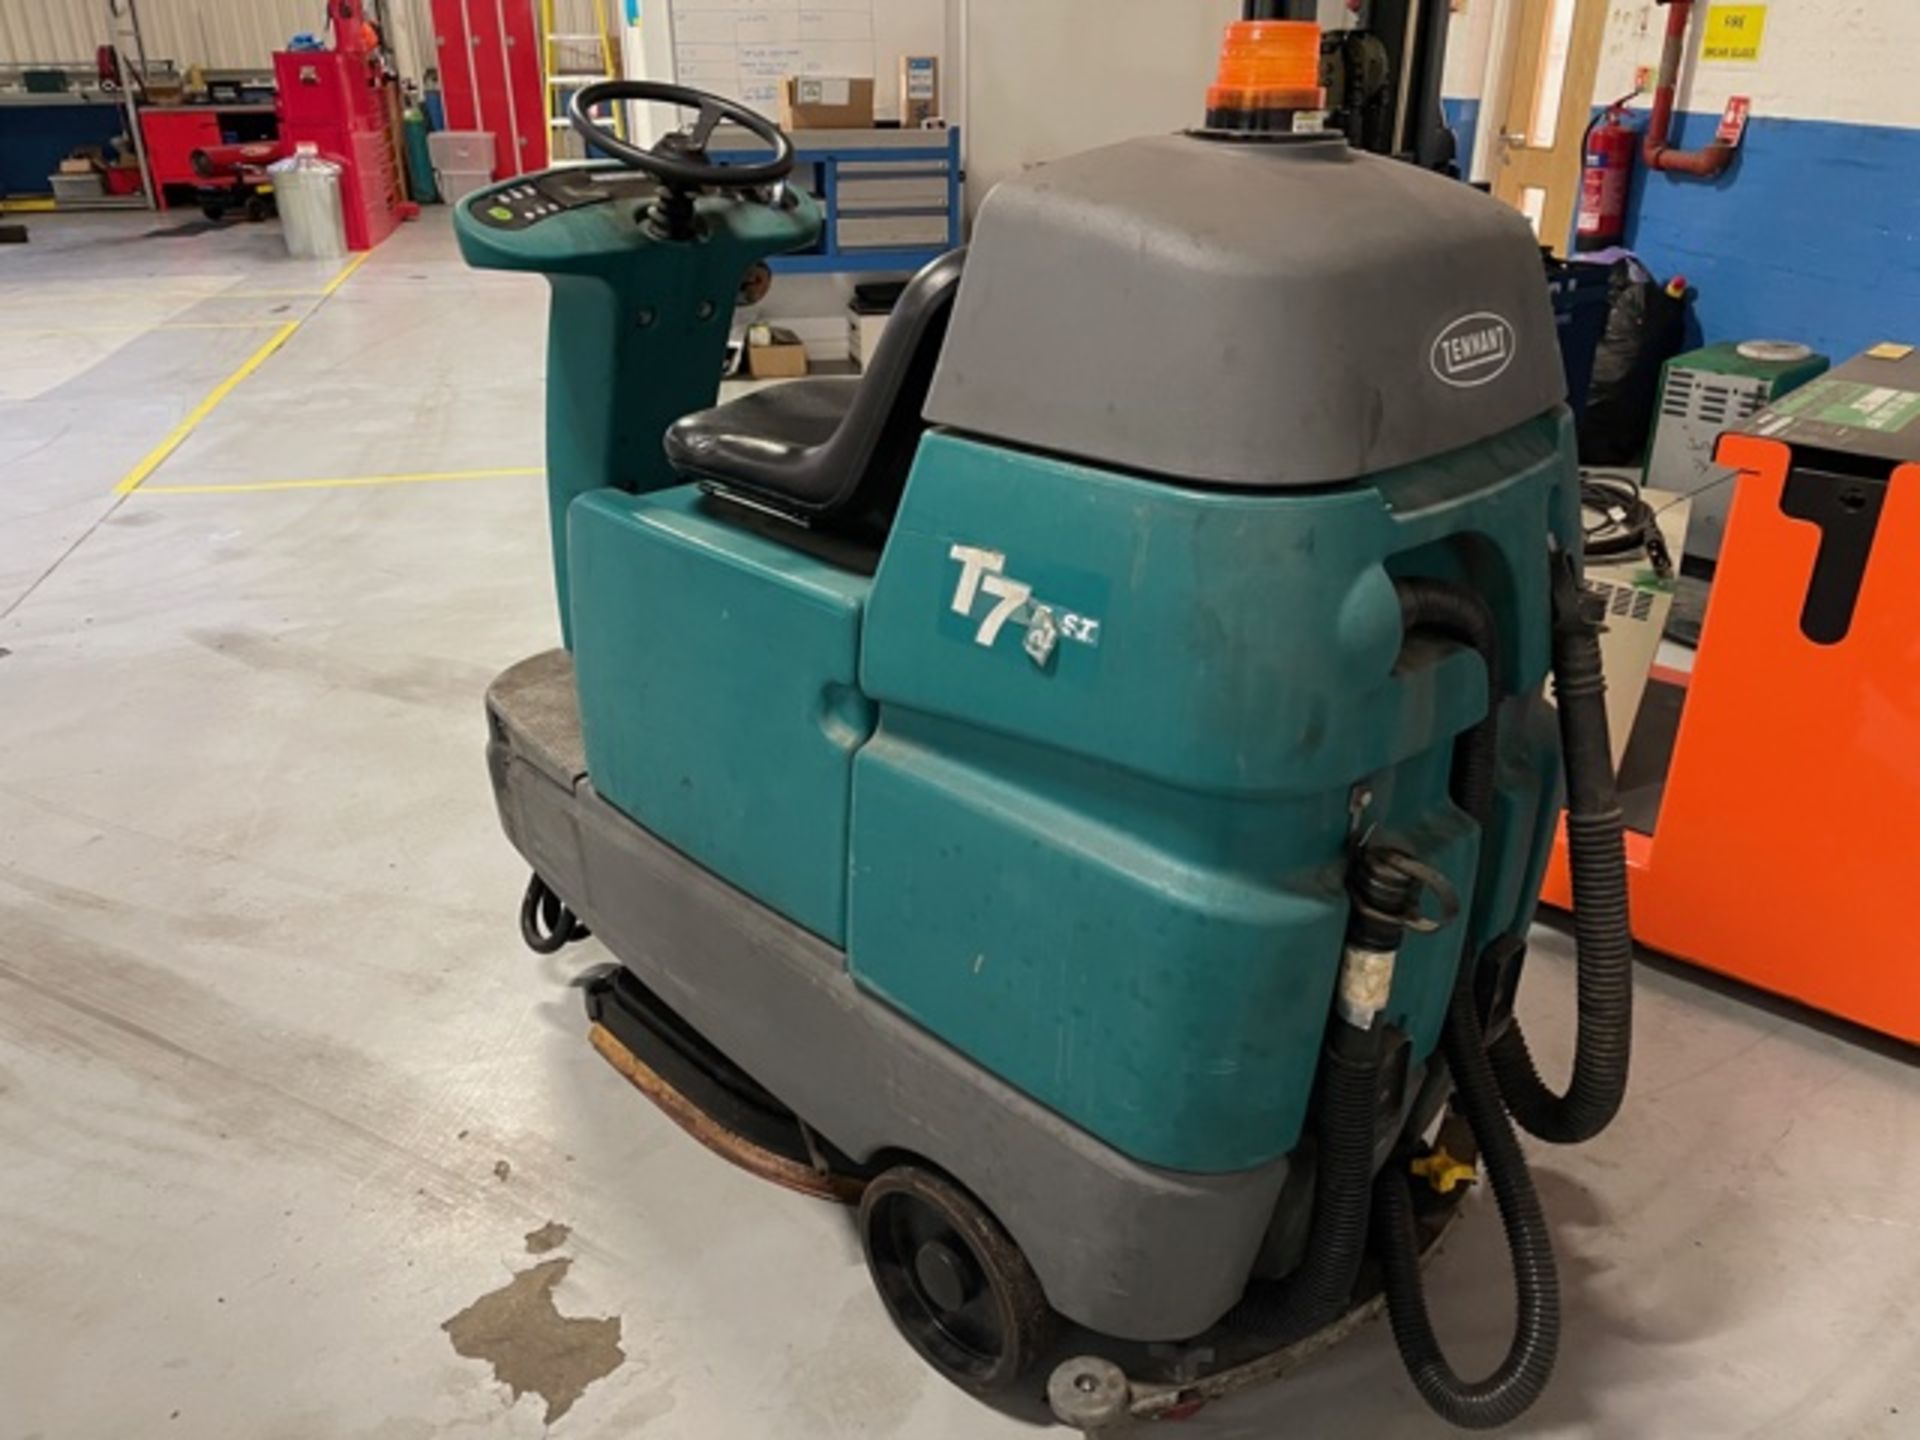 TENNANT T7 SIDE ON FLOOR CLEANER 2005 ELECTRIC - Image 3 of 3